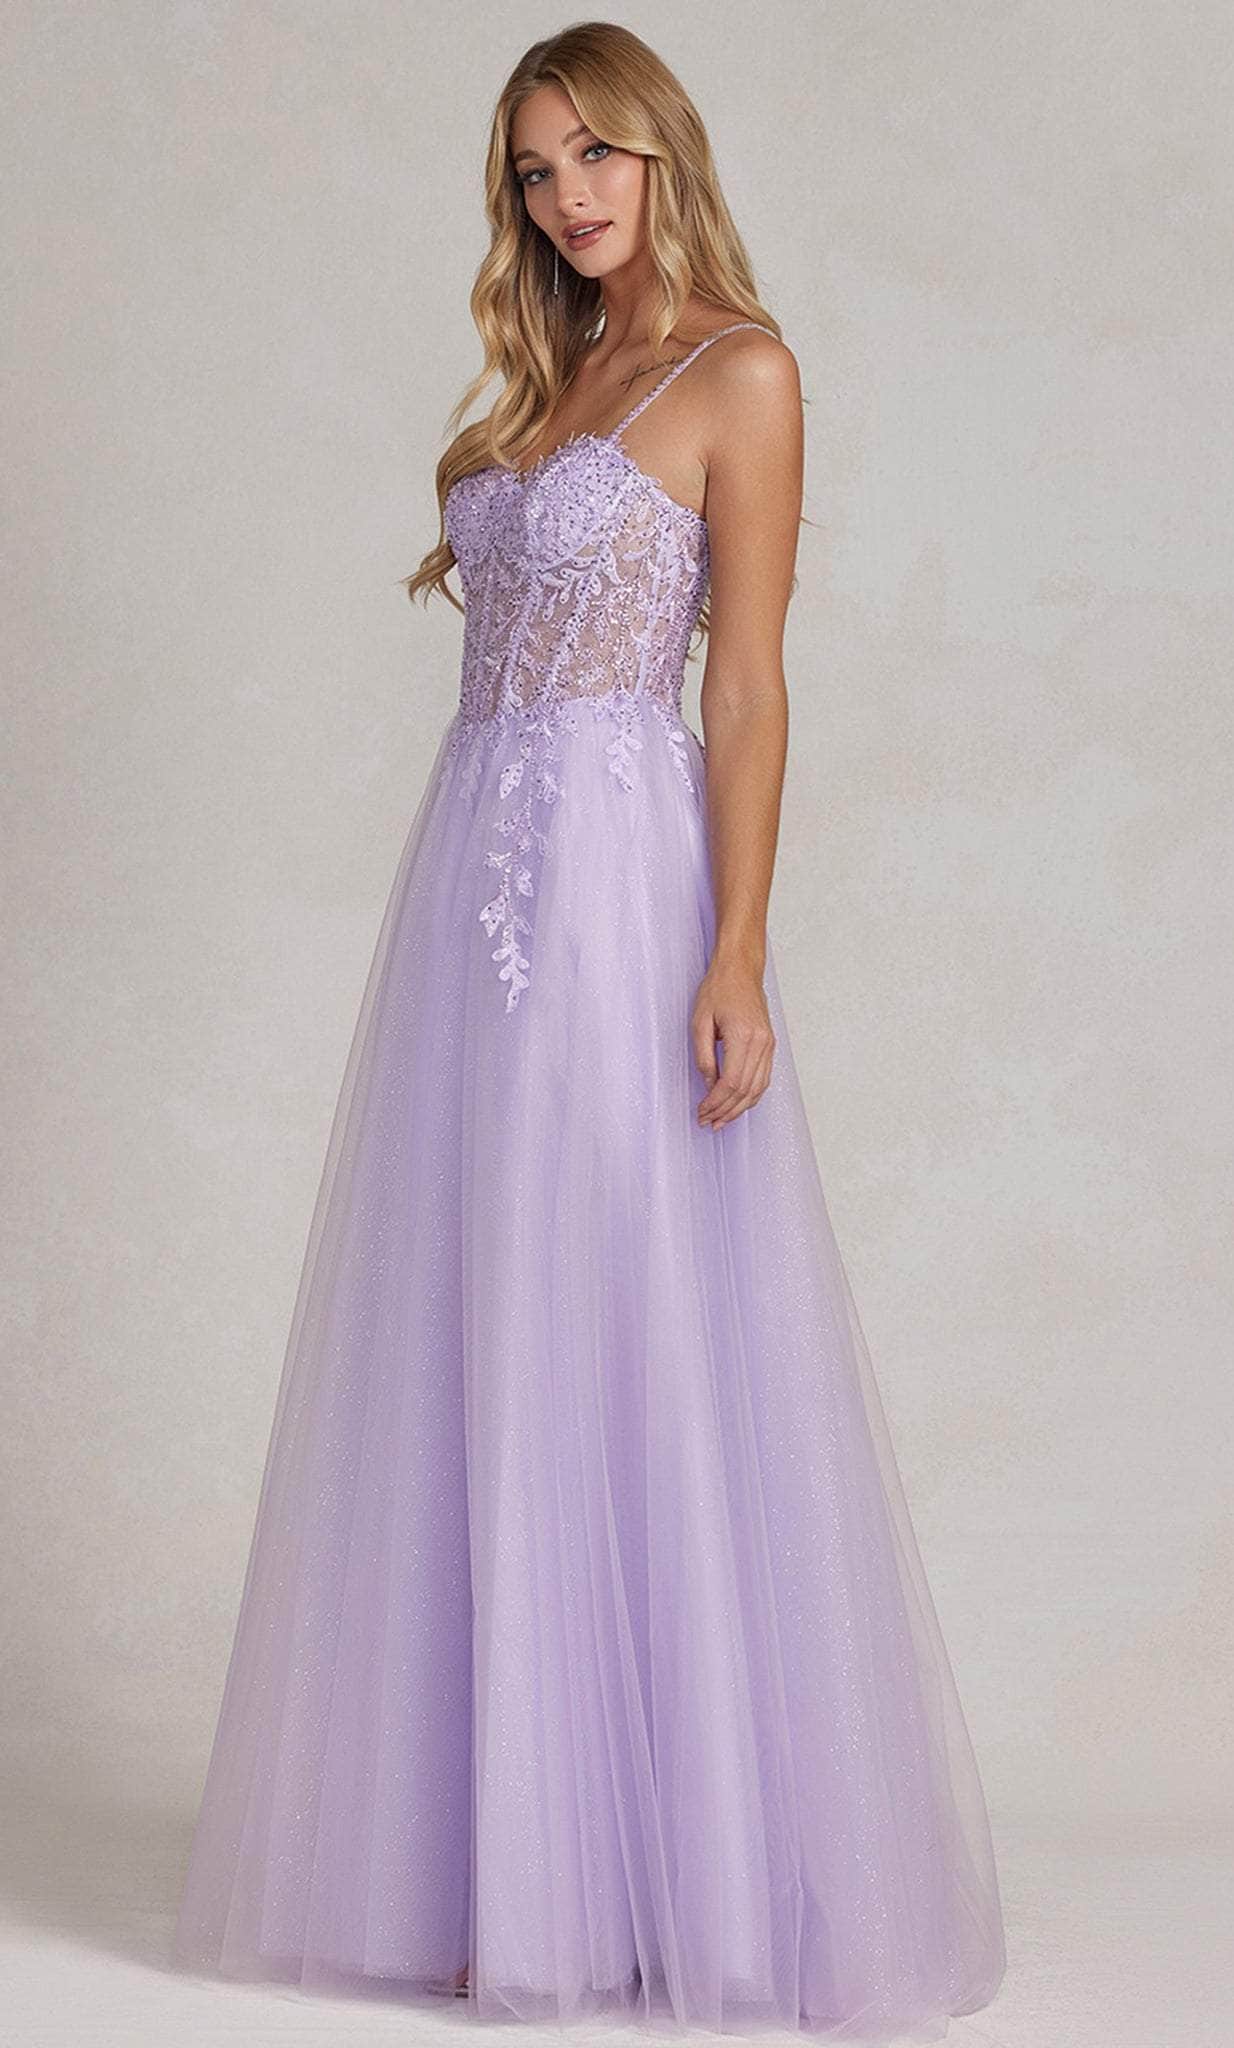 Nox Anabel F1087 - Sheer Sweetheart Prom Gown Prom Dresses 00 / Lilac